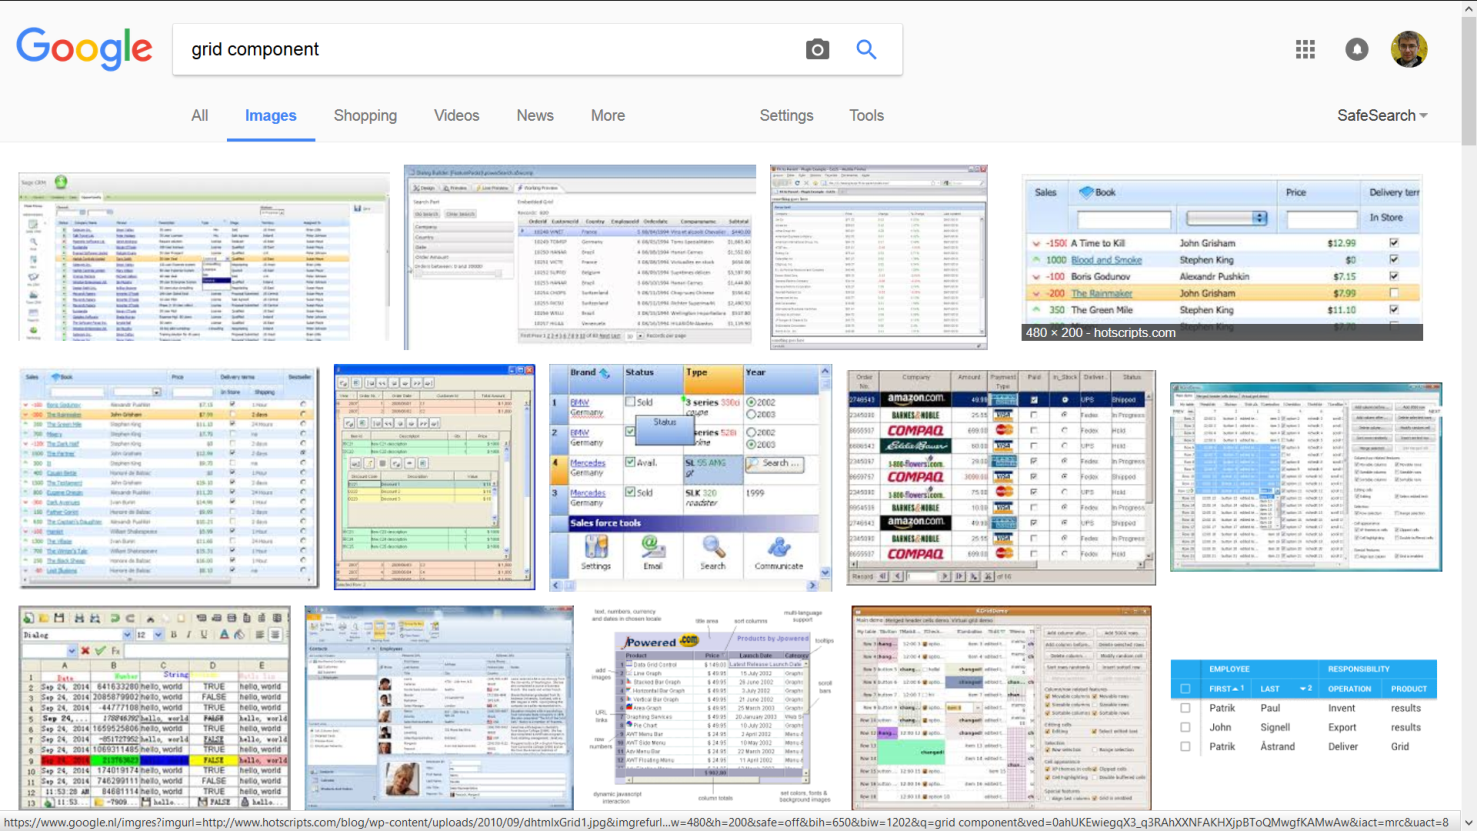 The result of the Google image search by &apos;grid component&apos; keyword